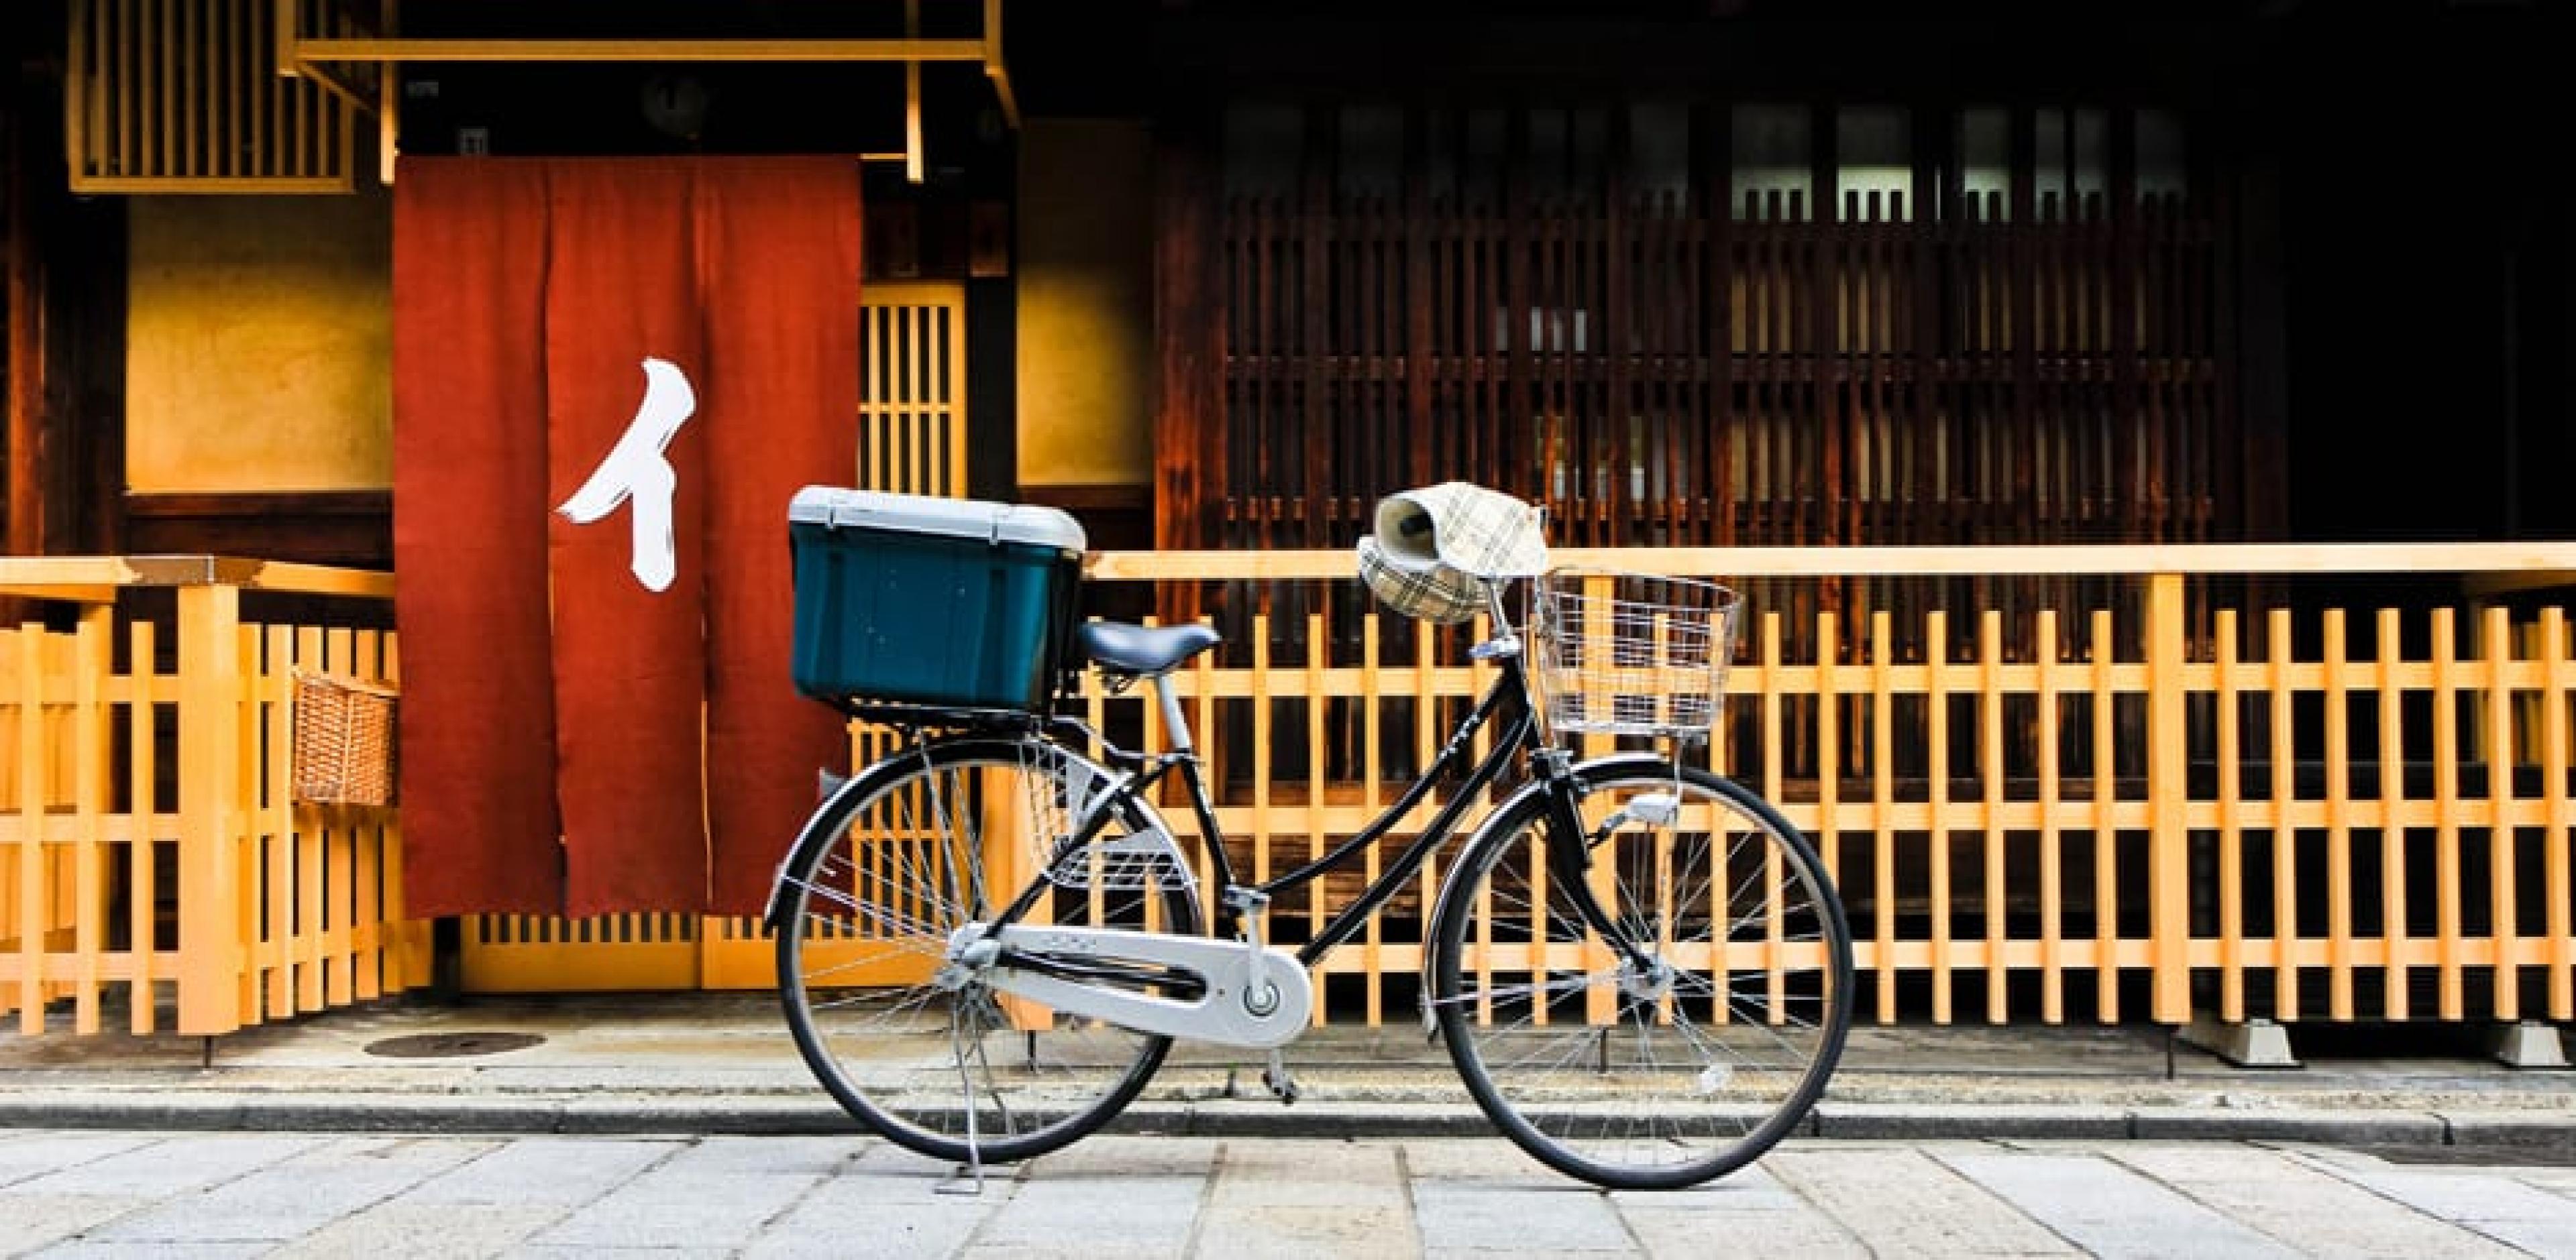 Bicycle parked on street in Kyoto Japan